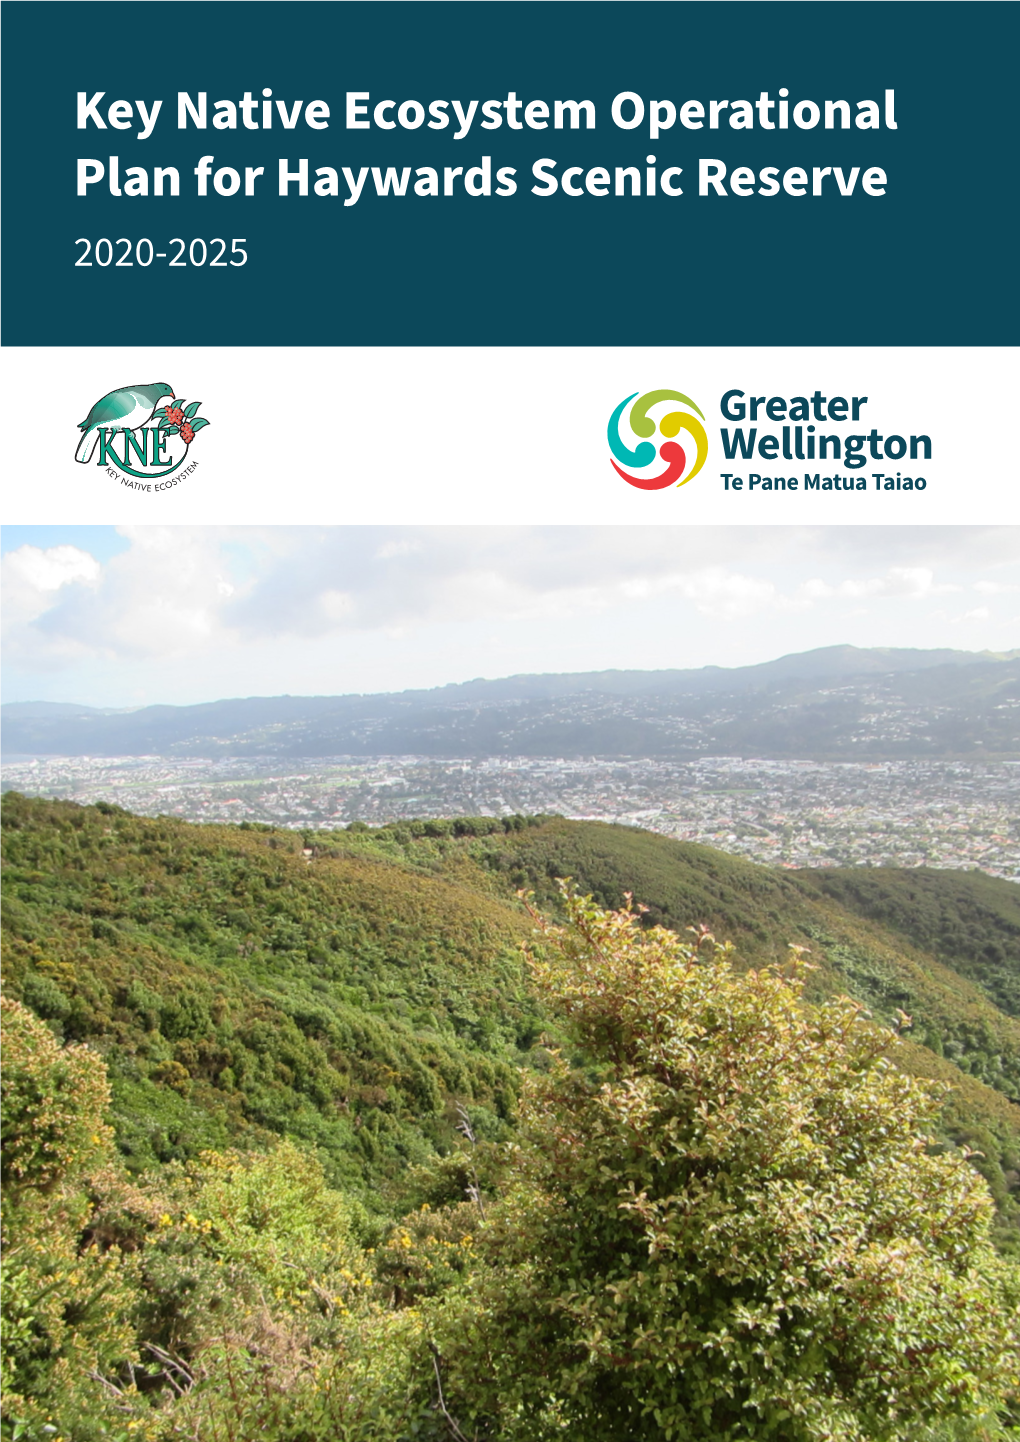 Key Native Ecosystem Operational Plan for Haywards Scenic Reserve 2020-2025